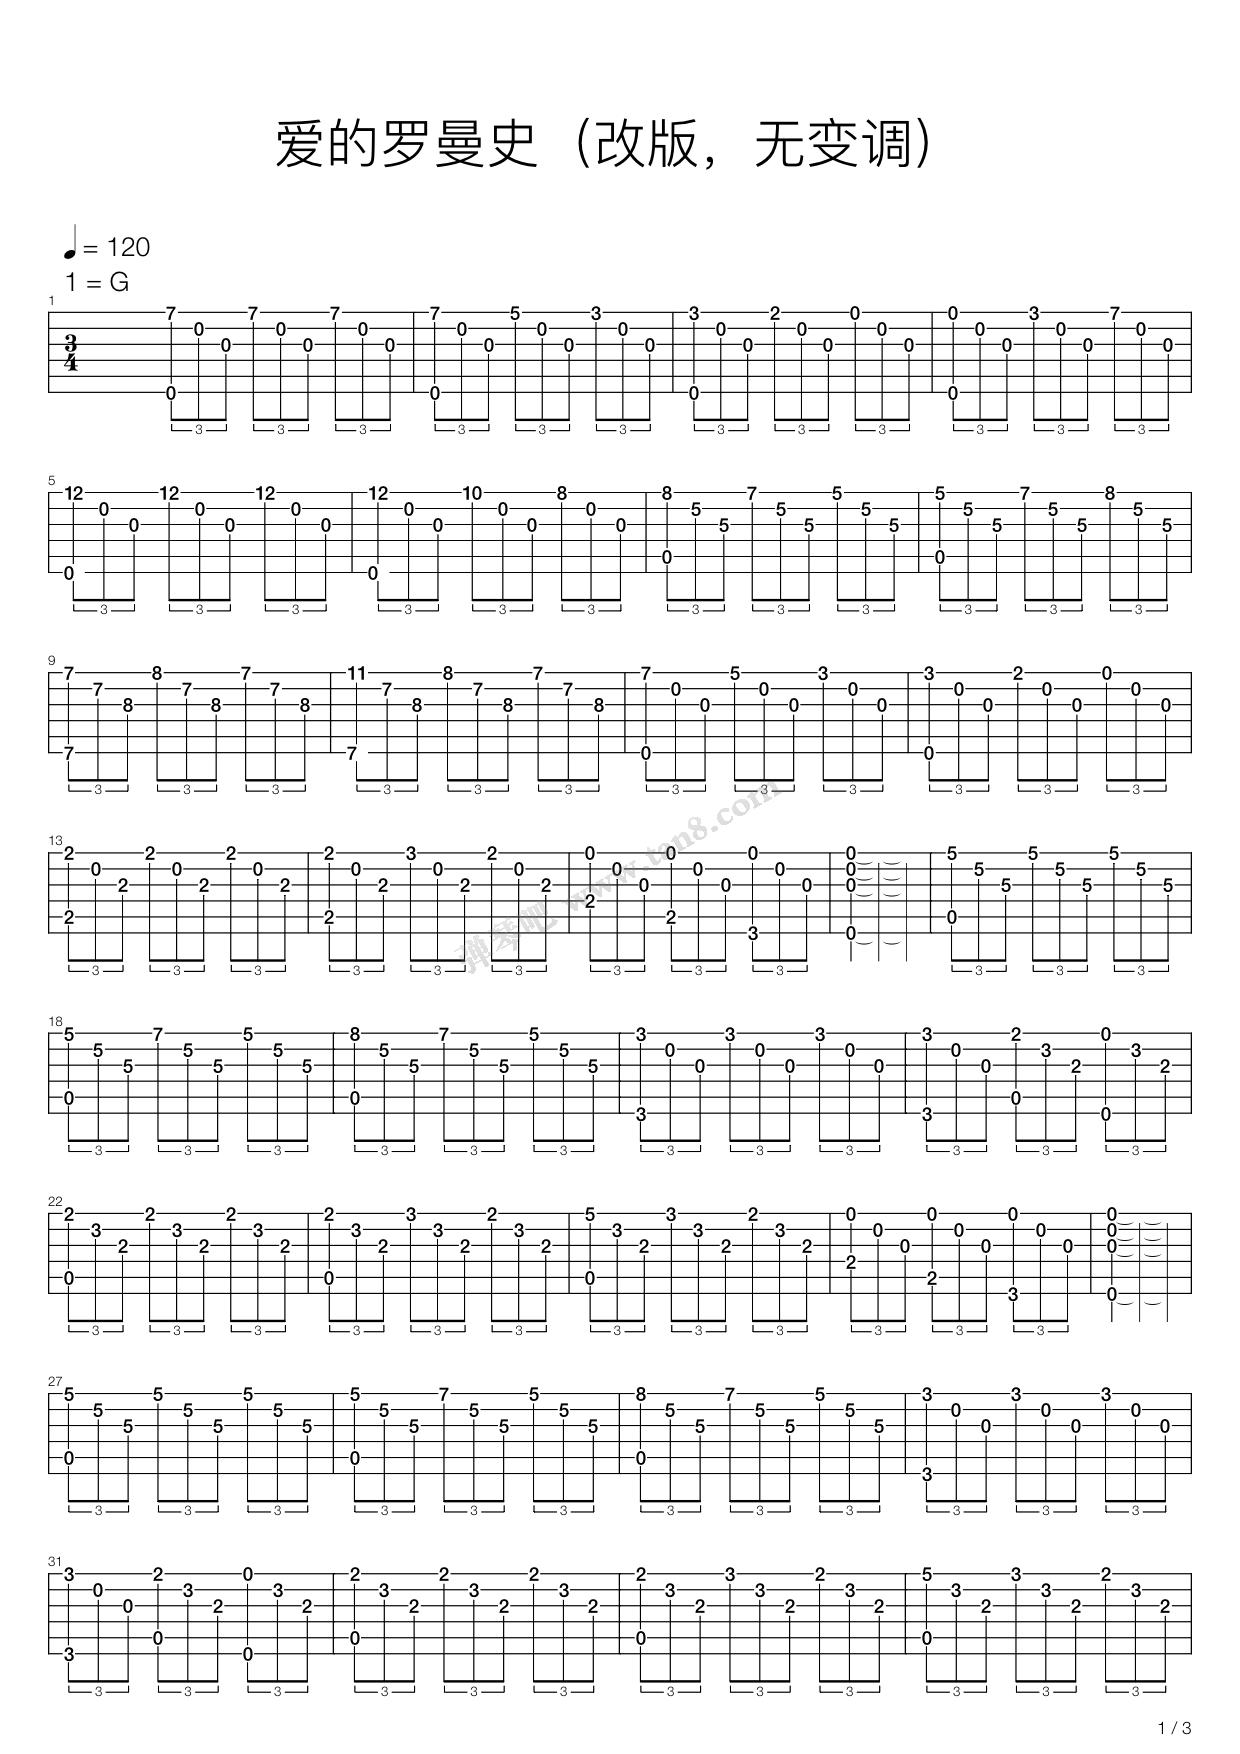 Romance De Amor by Romance Anonimo - Easy Version Guitar Tabs Chords Notes Sheet Music Free